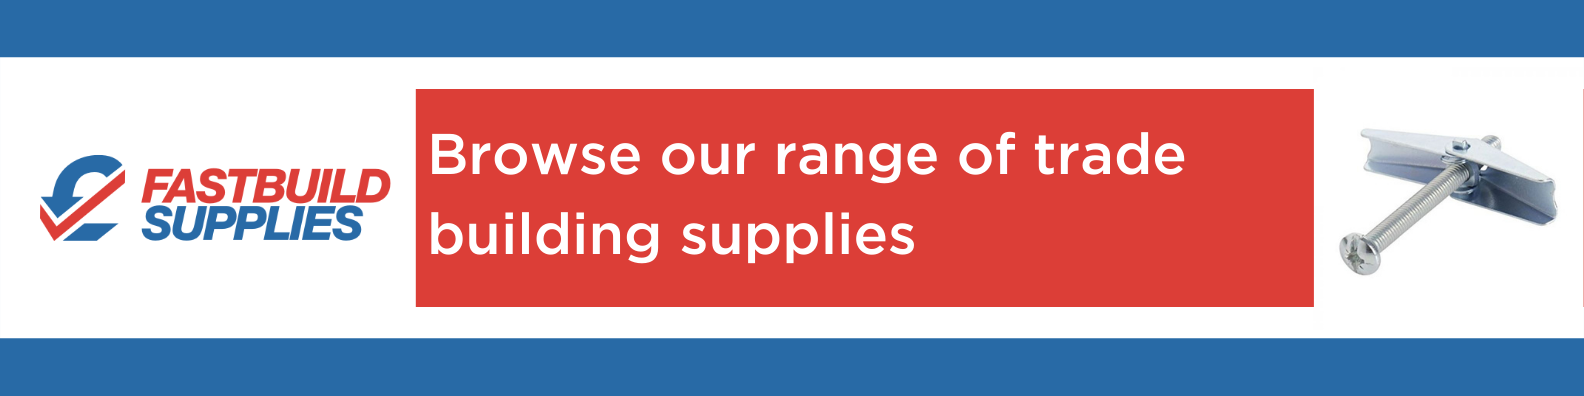 Browse our range of trade building supplies